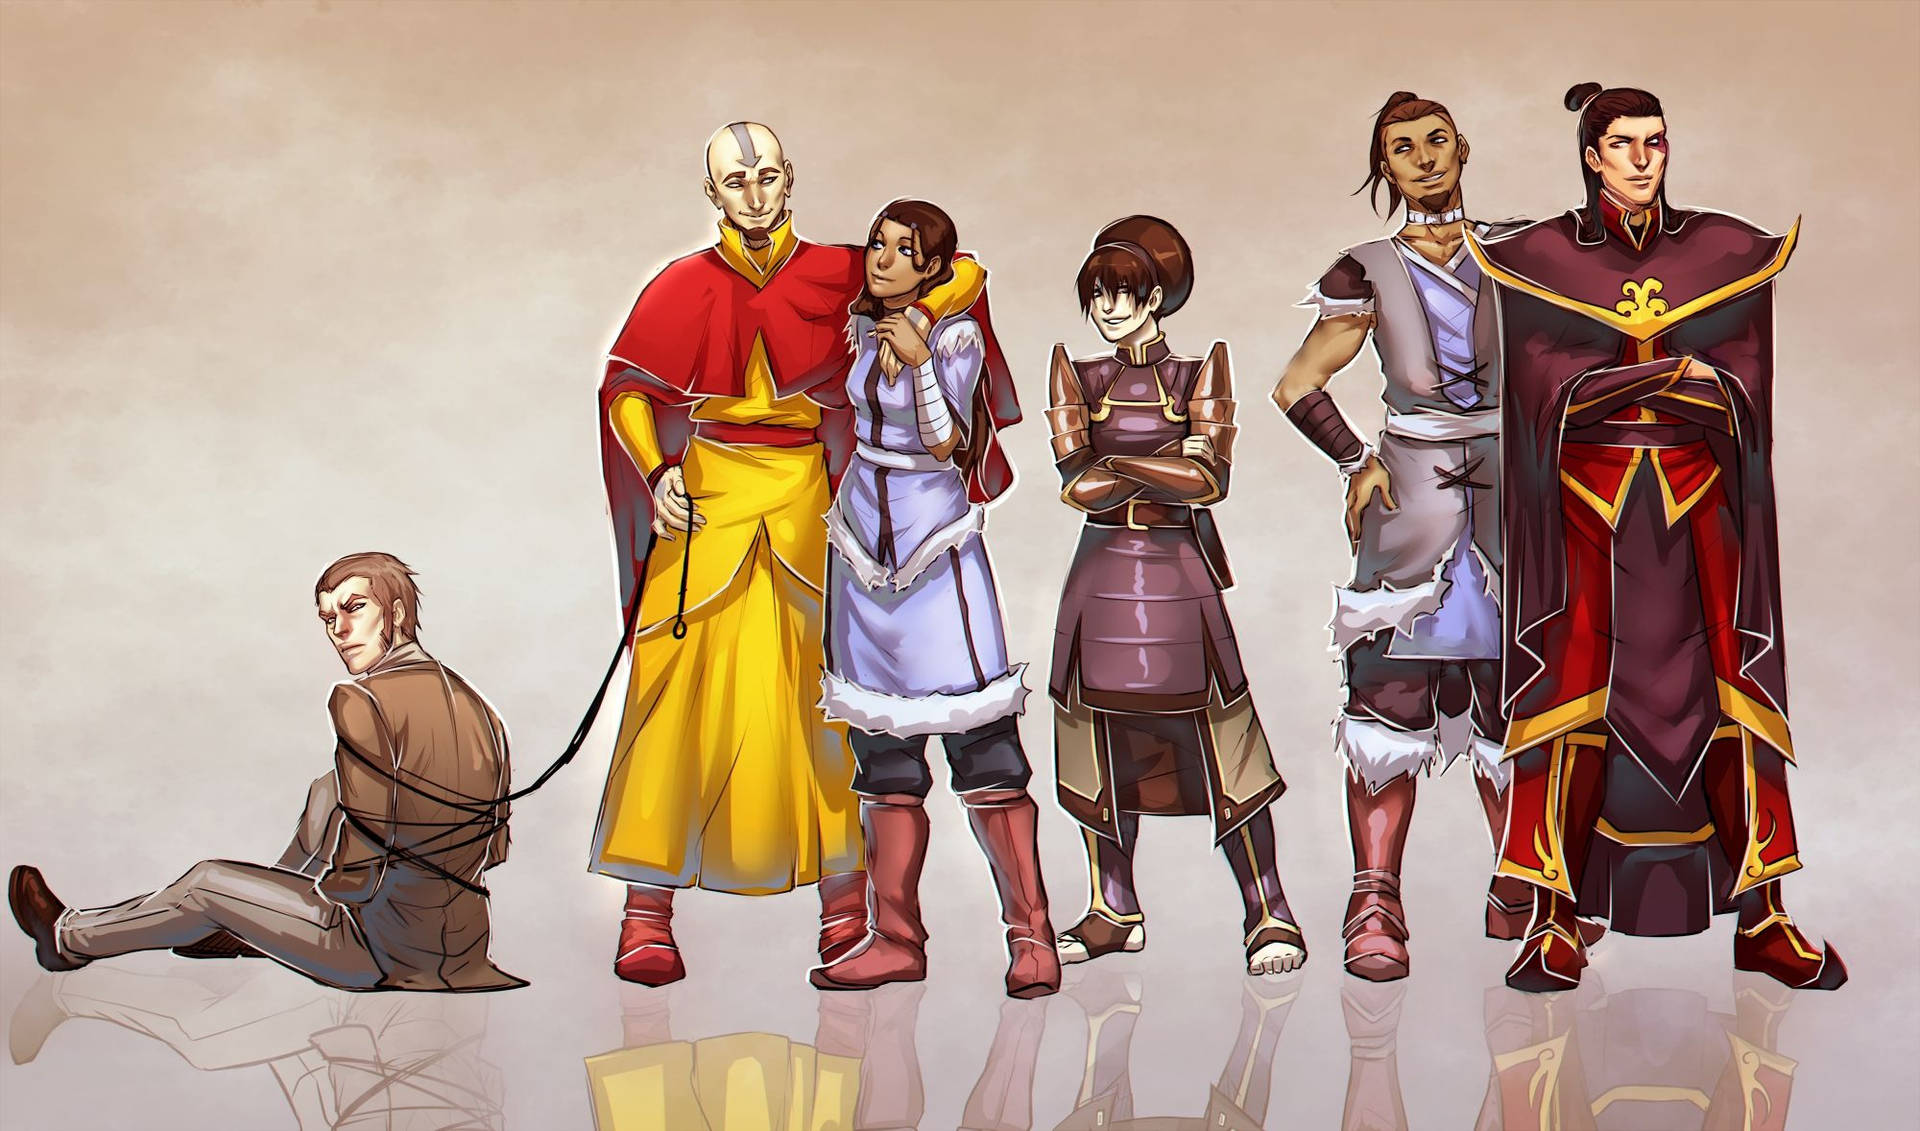 Animation Art  Avatar characters Avatar cosplay The last airbender  characters